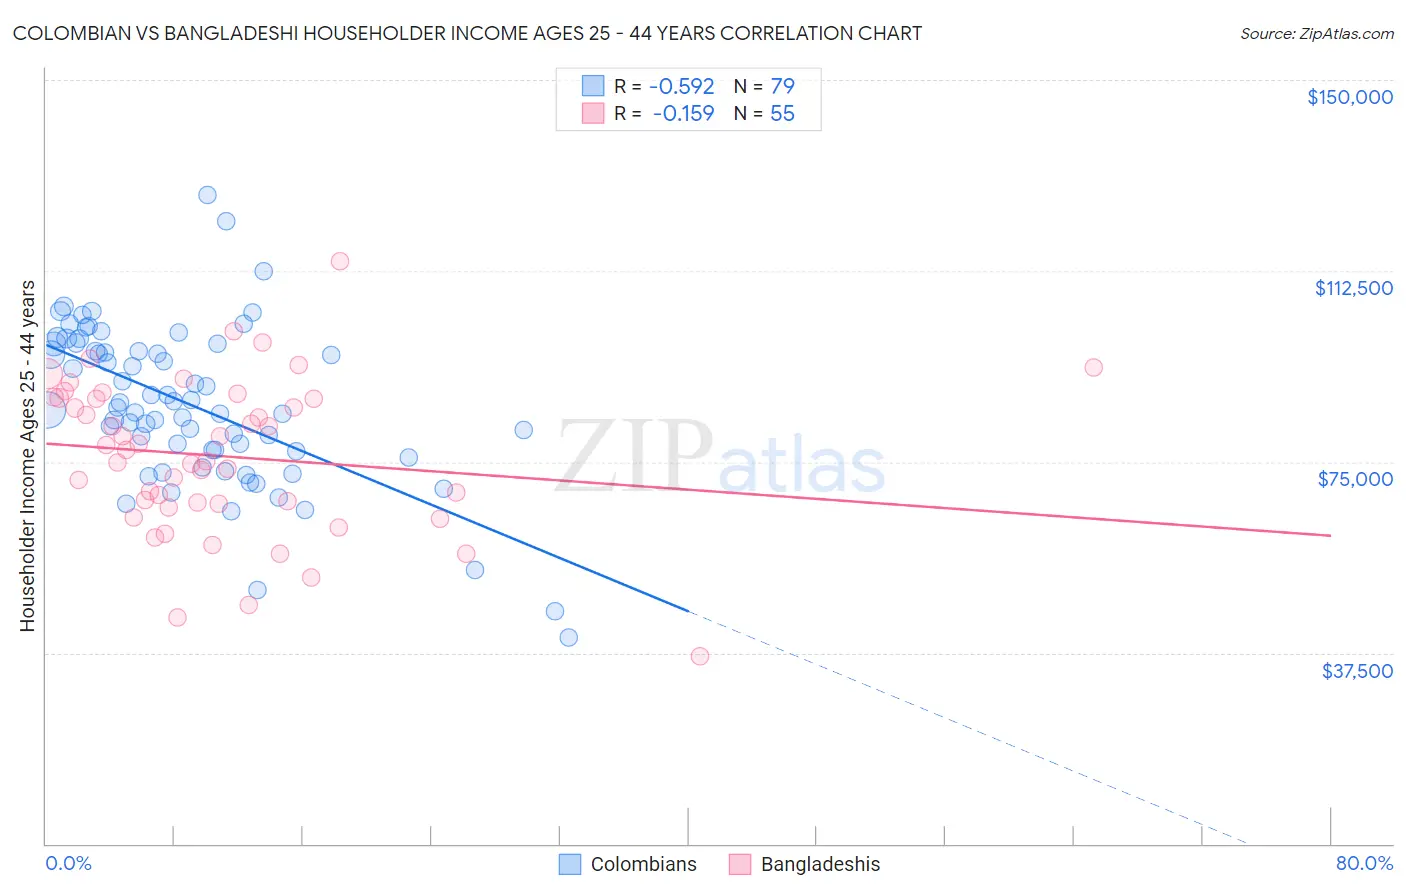 Colombian vs Bangladeshi Householder Income Ages 25 - 44 years